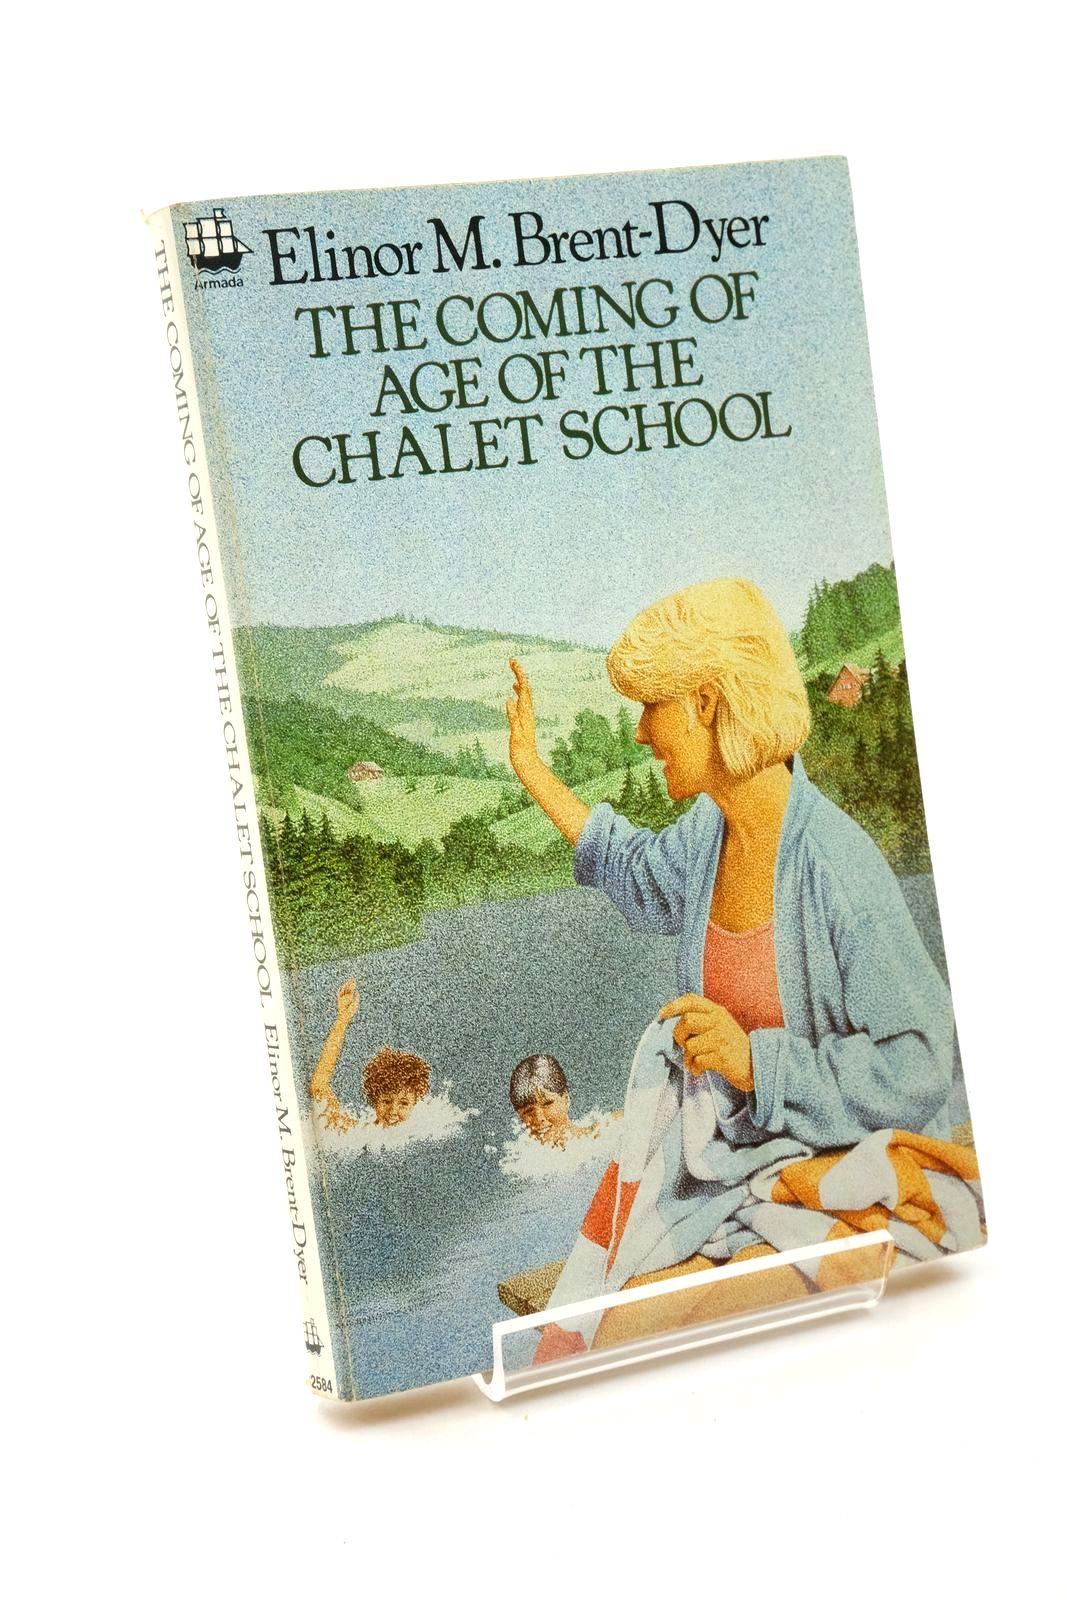 Photo of THE COMING OF AGE OF THE CHALET SCHOOL- Stock Number: 1322578